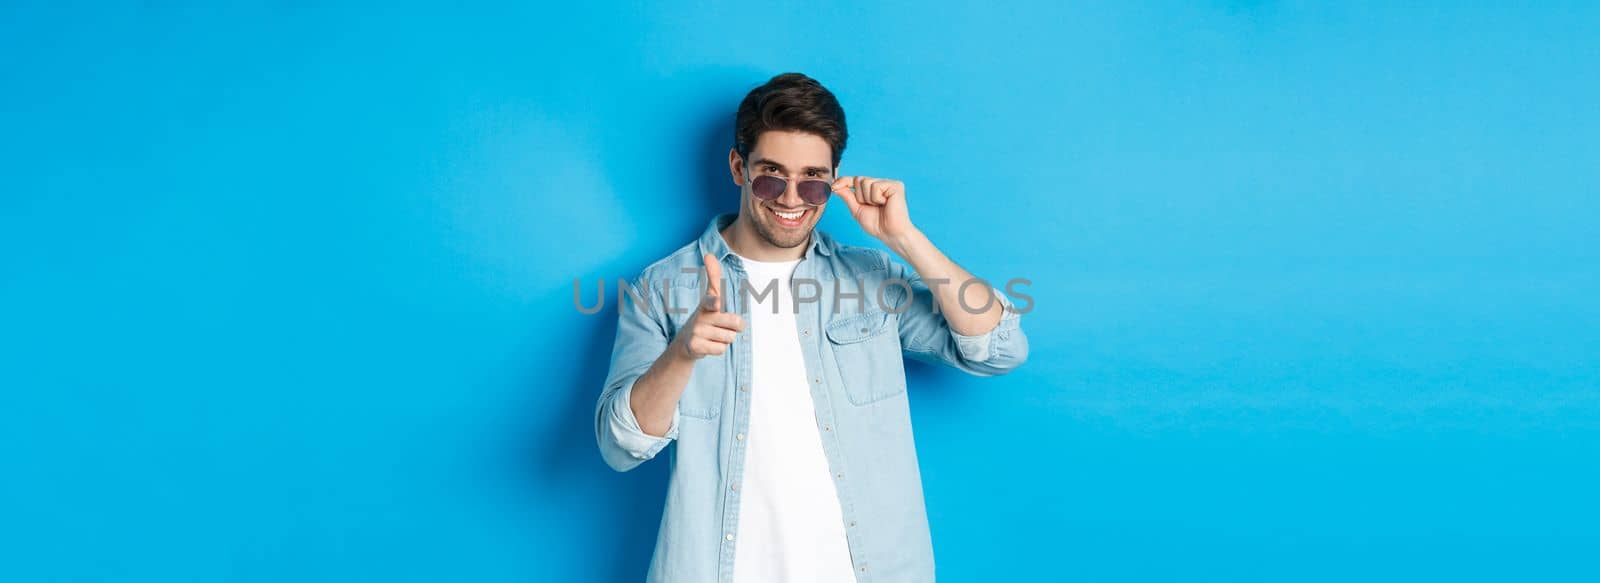 Handsome cheeky guy in sunglasses, smiling and pointing finger gun at camera, flirting with you, standing over blue background.